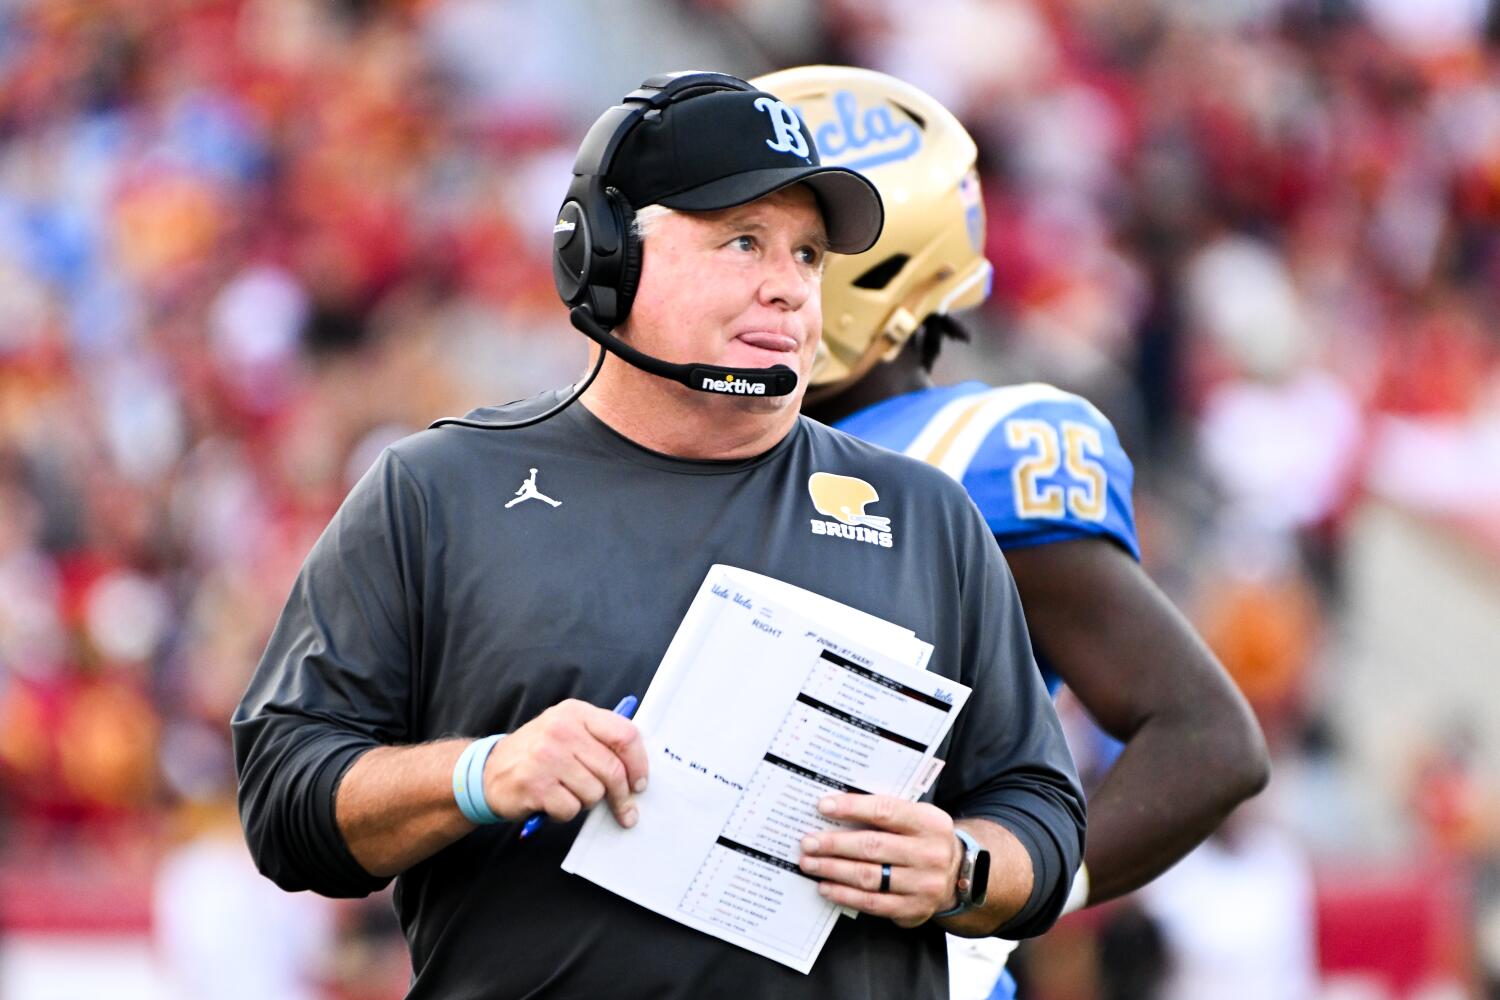 Chip Kelly's ceiling didn't change after beating USC, but it's enough for UCLA right now